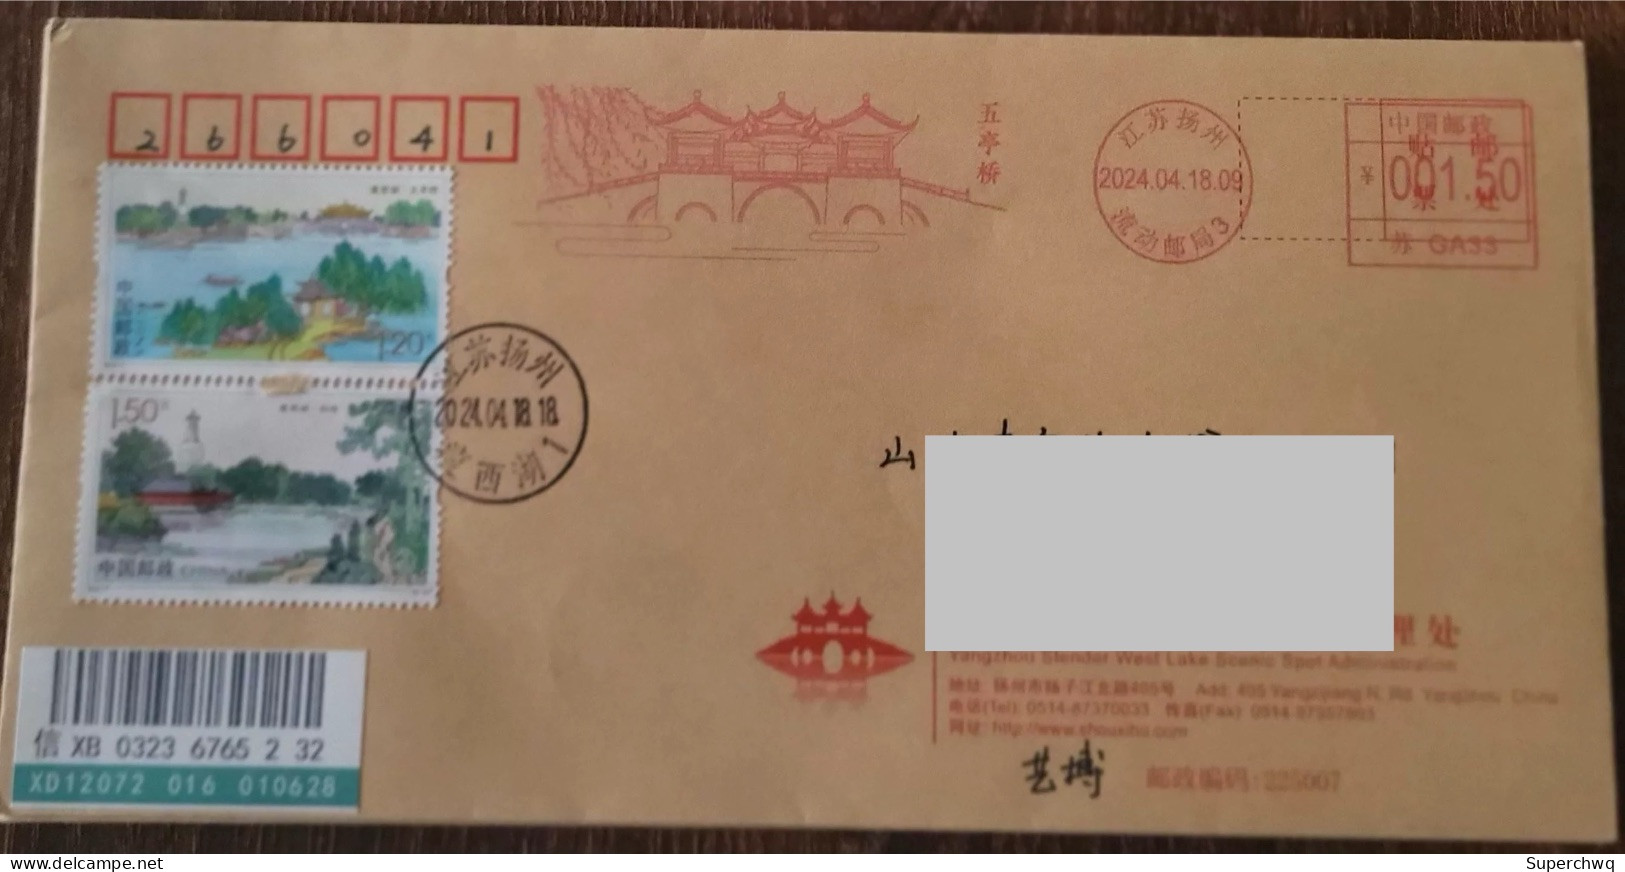 China Cover "Wuting Bridge" (Yangzhou, Jiangsu) Postage Stamp First Day Actual Delivery Seal - Omslagen